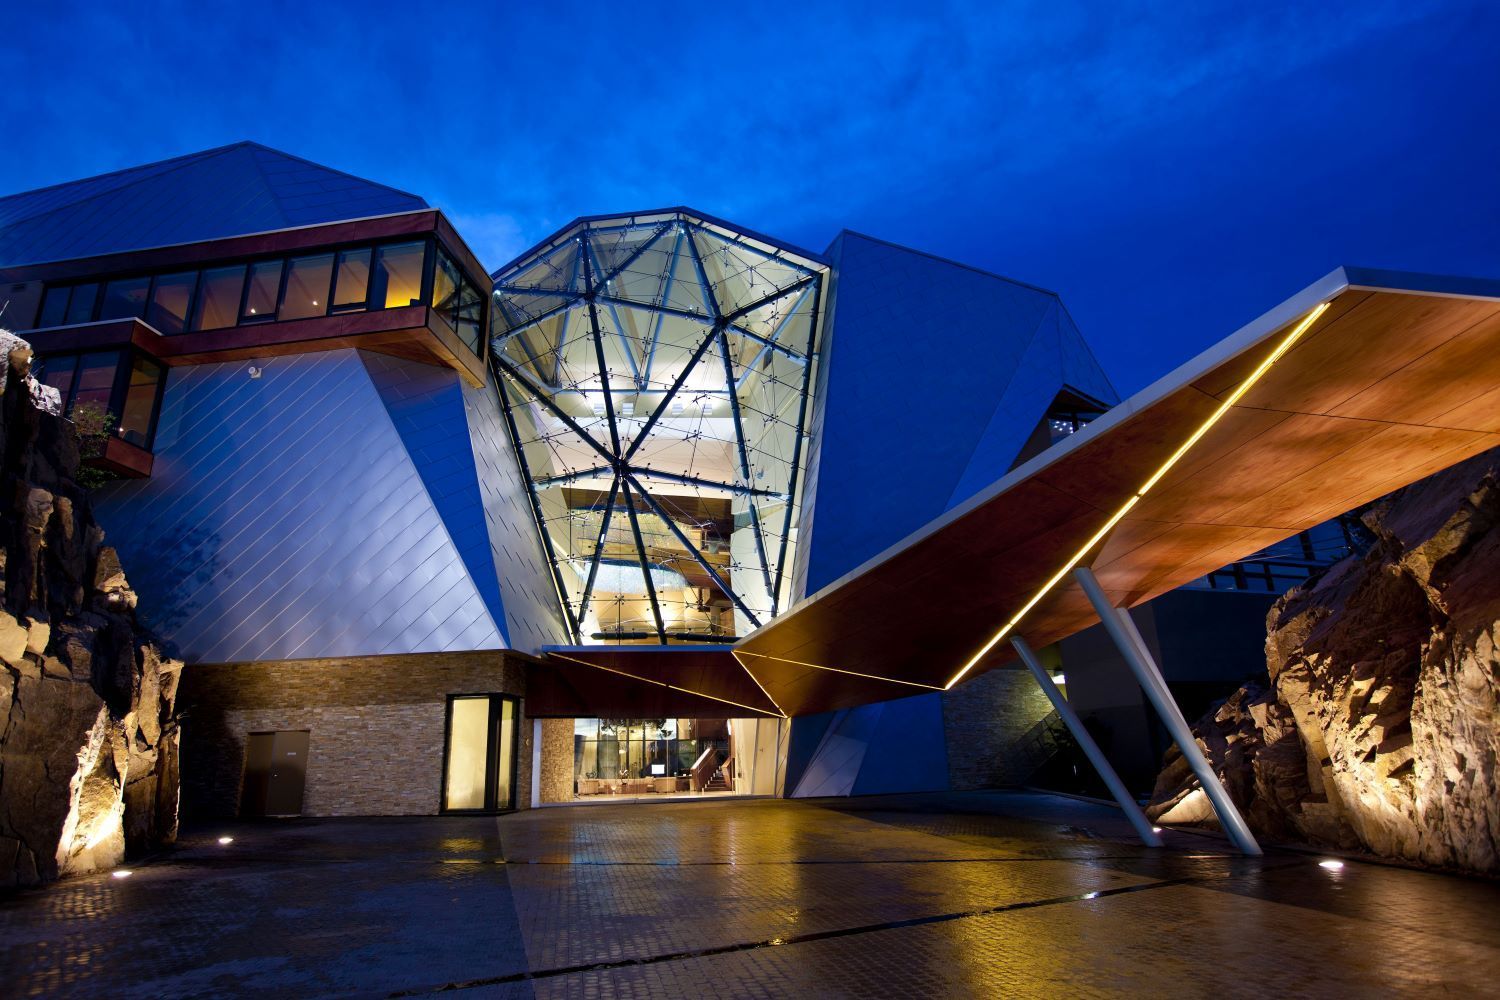 Exterior and entrance of Sparkling Hill Resort in Vernon Bc.